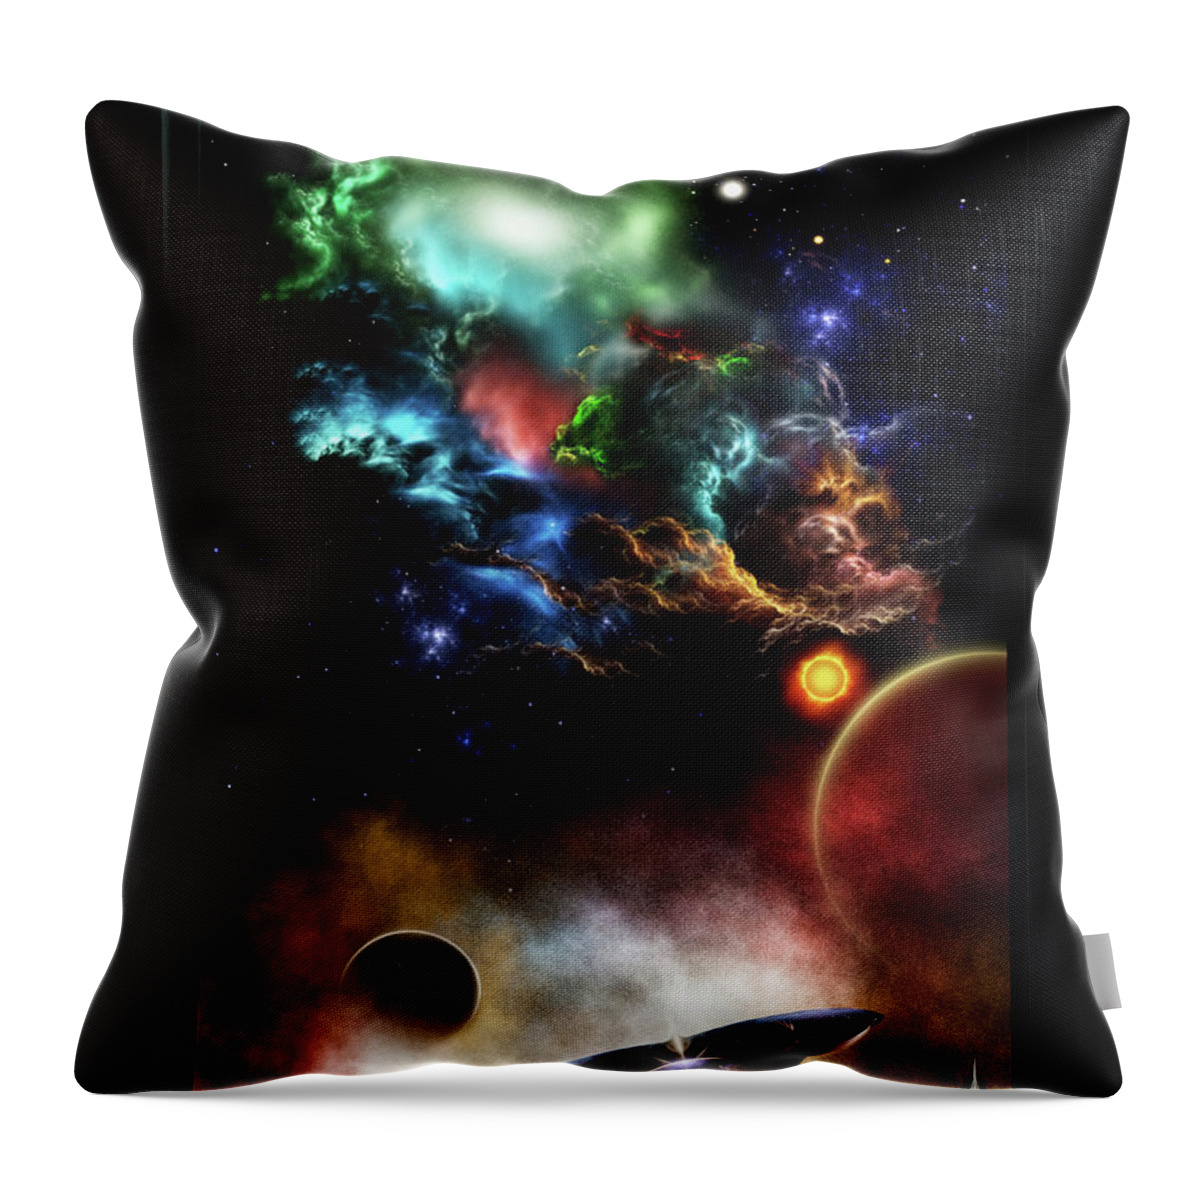 Space Throw Pillow featuring the digital art Beyond Space and Time Fractal Art II Fantasy Spacescape by Xzendor7